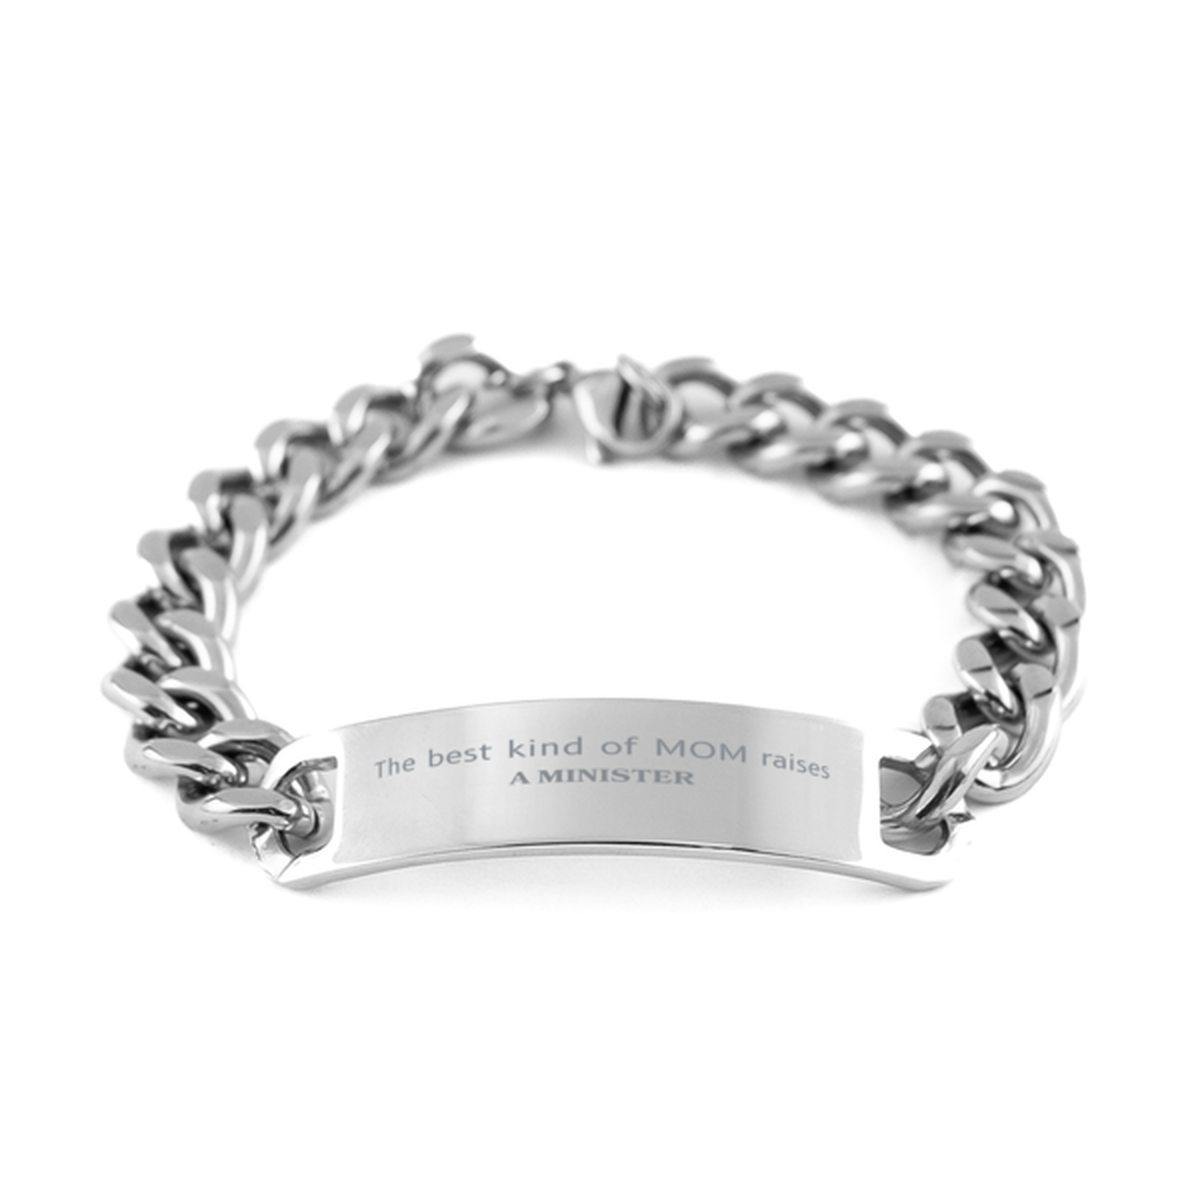 Funny Minister Mom Gifts, The best kind of MOM raises Minister, Birthday, Mother's Day, Cute Cuban Chain Stainless Steel Bracelet for Minister Mom